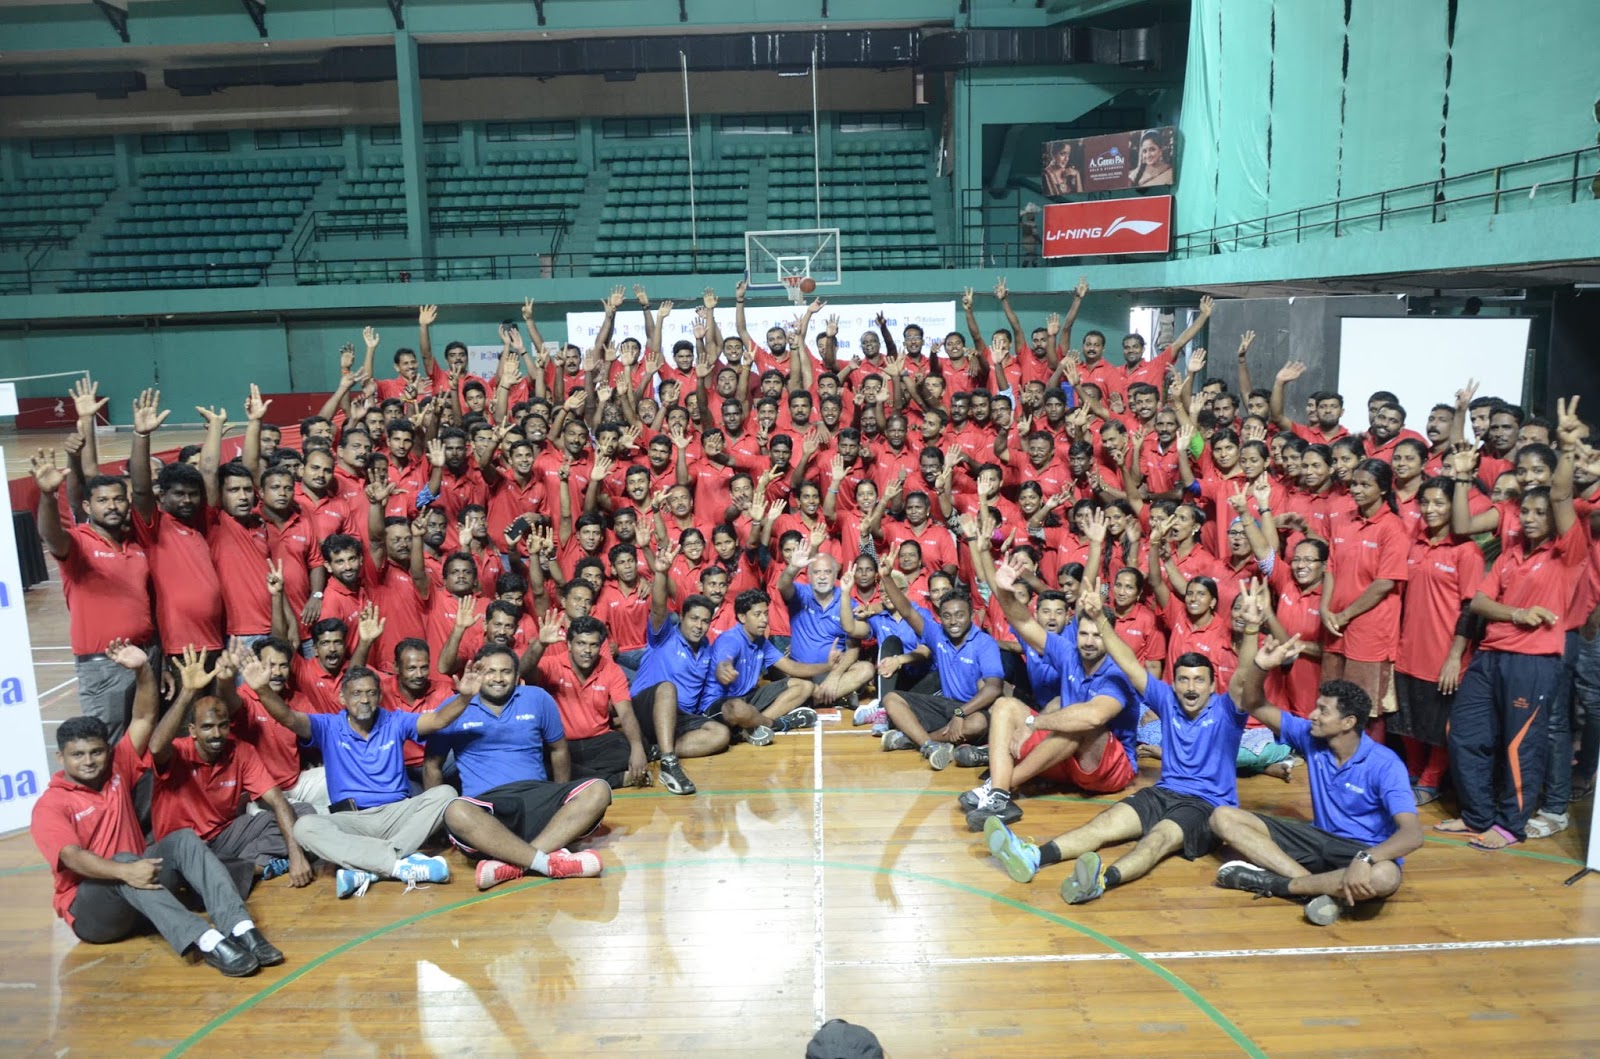 45 million youth will take part in Reliance Foundation Junior NBA